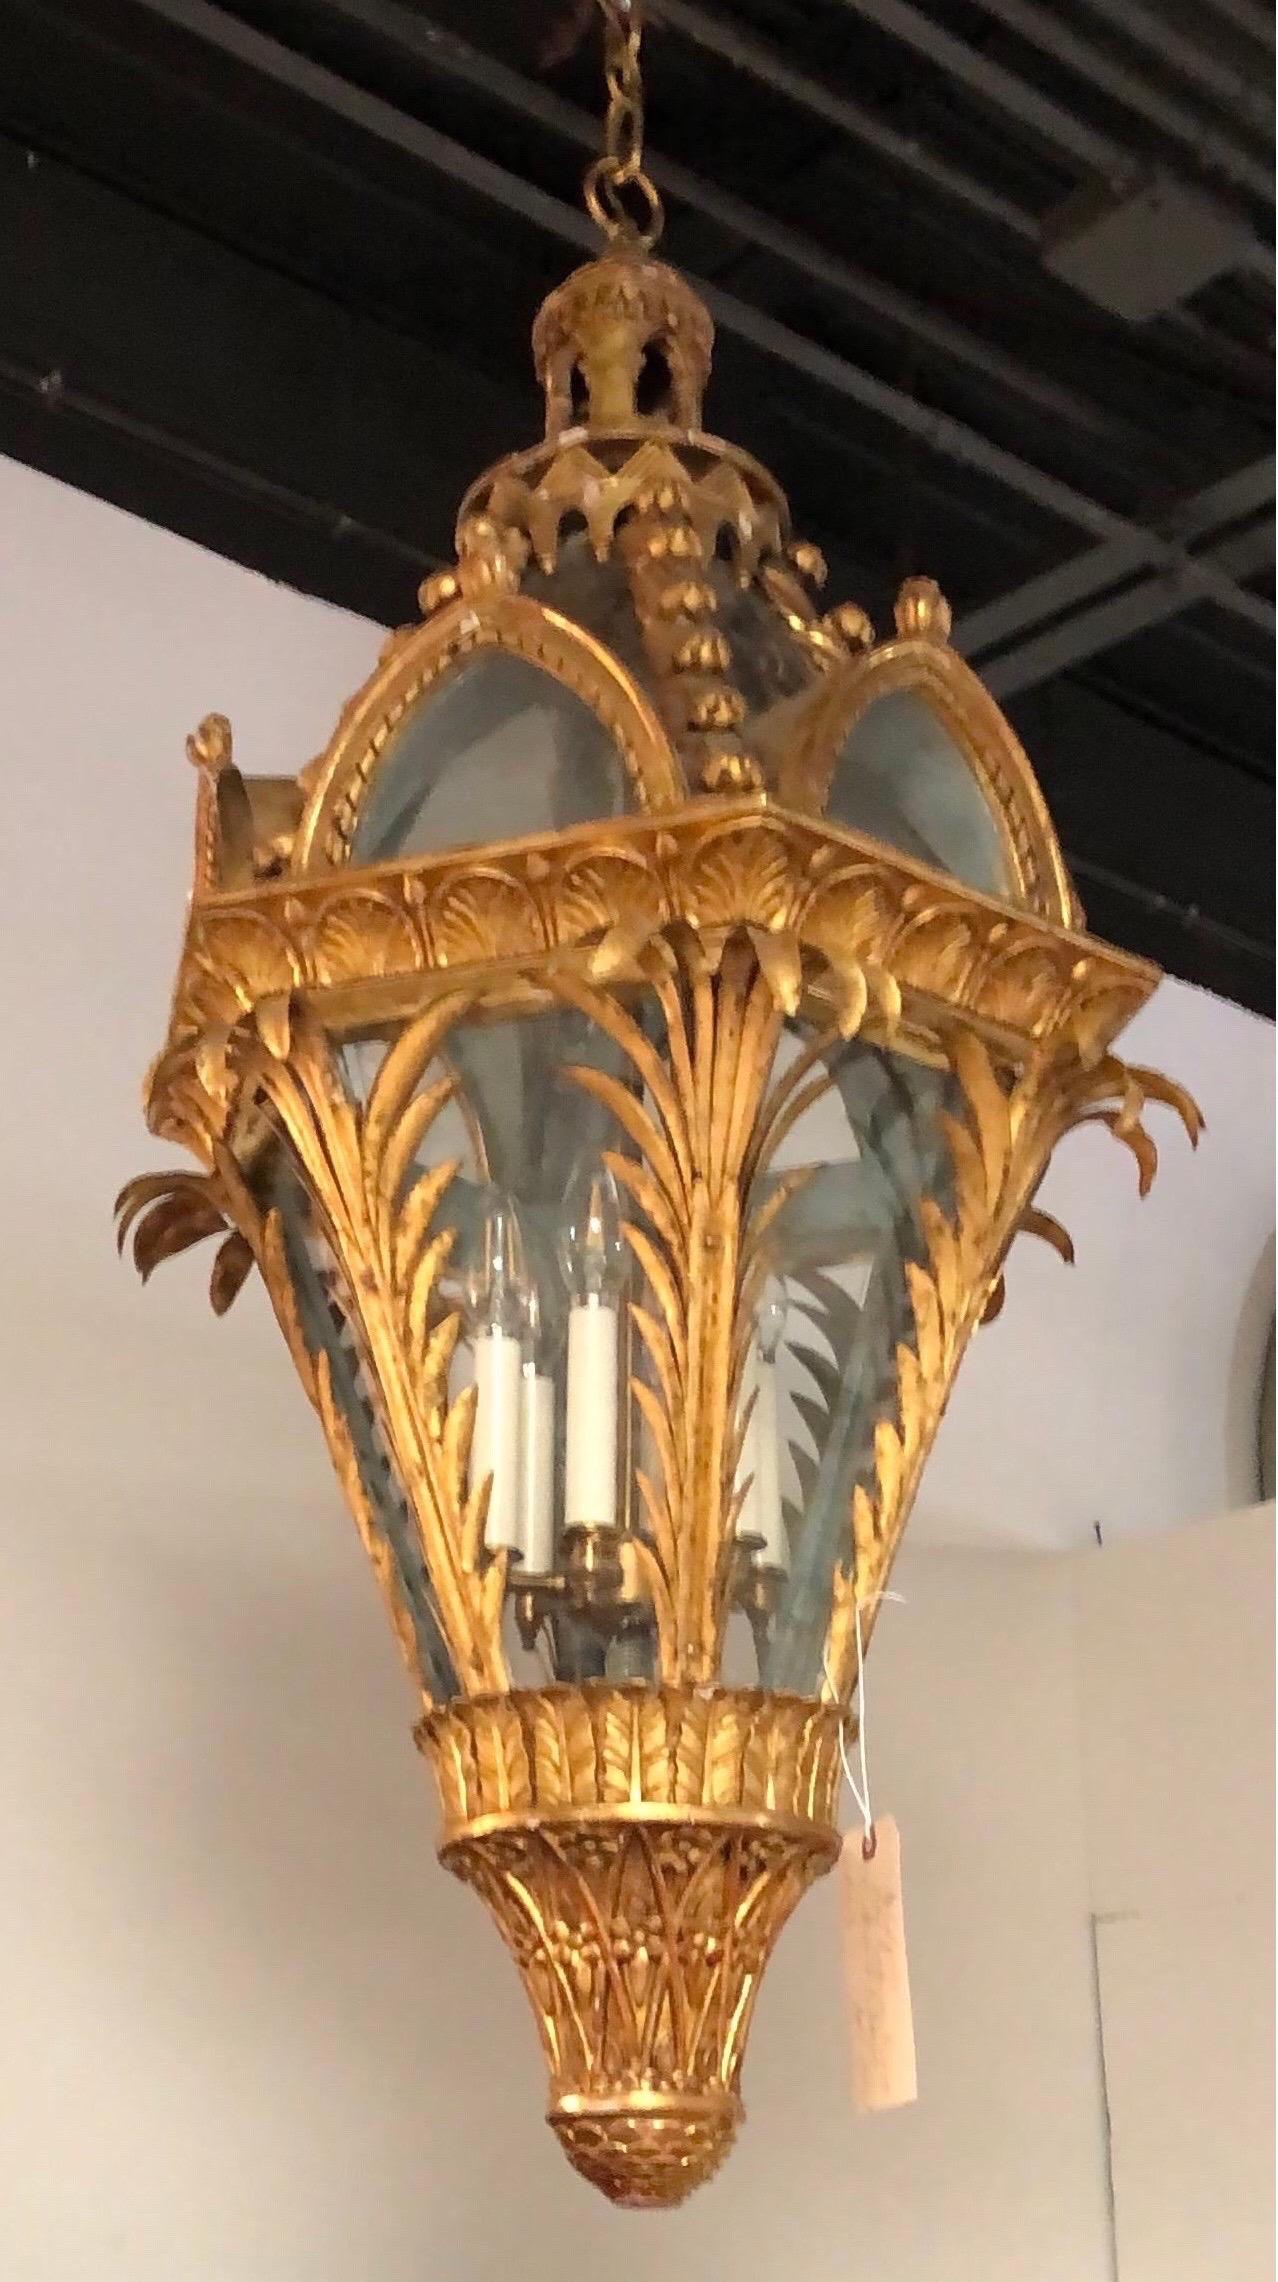 19th century giltwood and ole neo Gothic lantern. Italian or French, 19th century. Now electrified with 6 candle drop. Very impressive fixture.